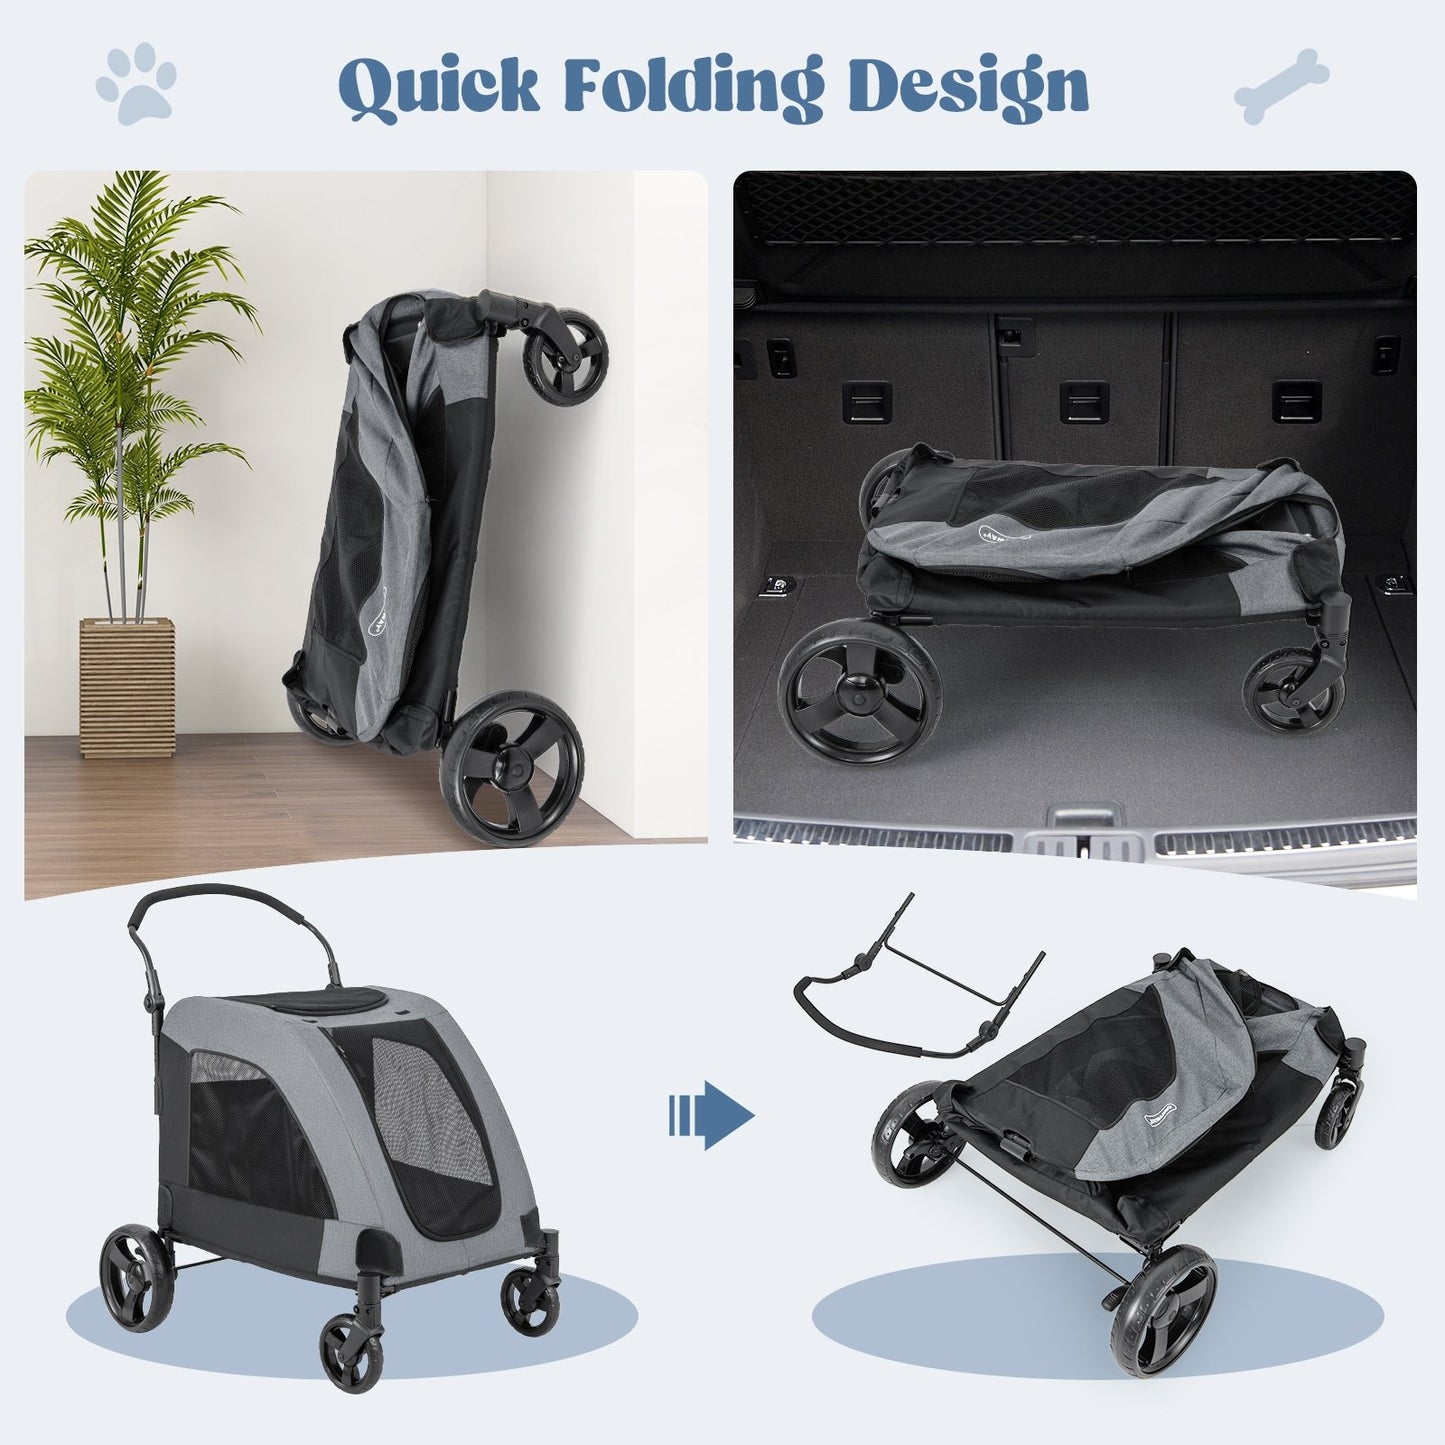 4 Wheels Extra Large Dog Stroller Foldable Pet Stroller with Dual Entry, Gray